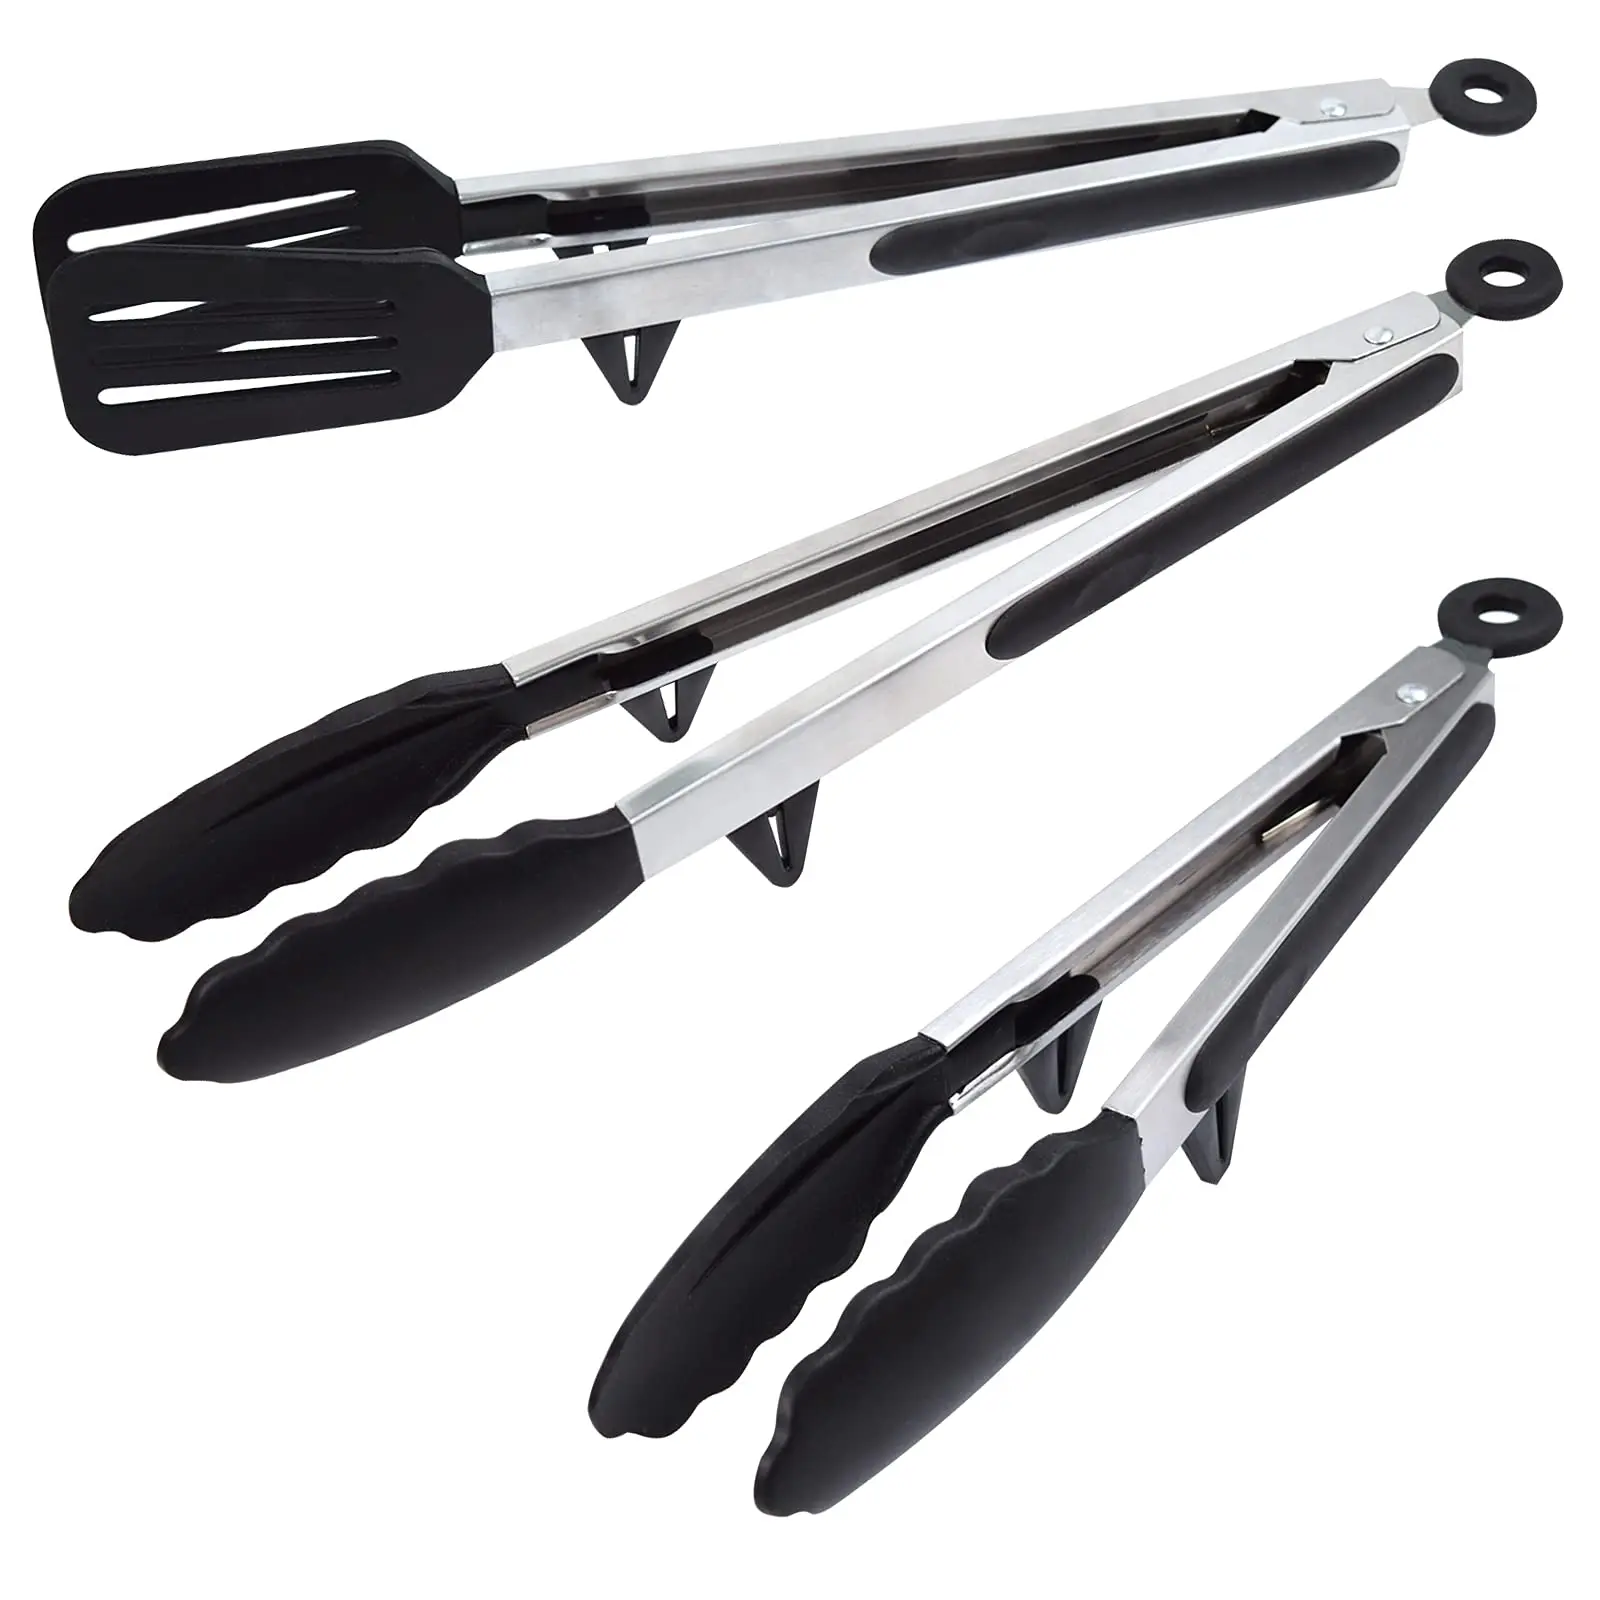 3 in1 Stainless Steel Kitchen Food Tongs Set for Cooking with BPA Free Silicone Tips KitchenTongs